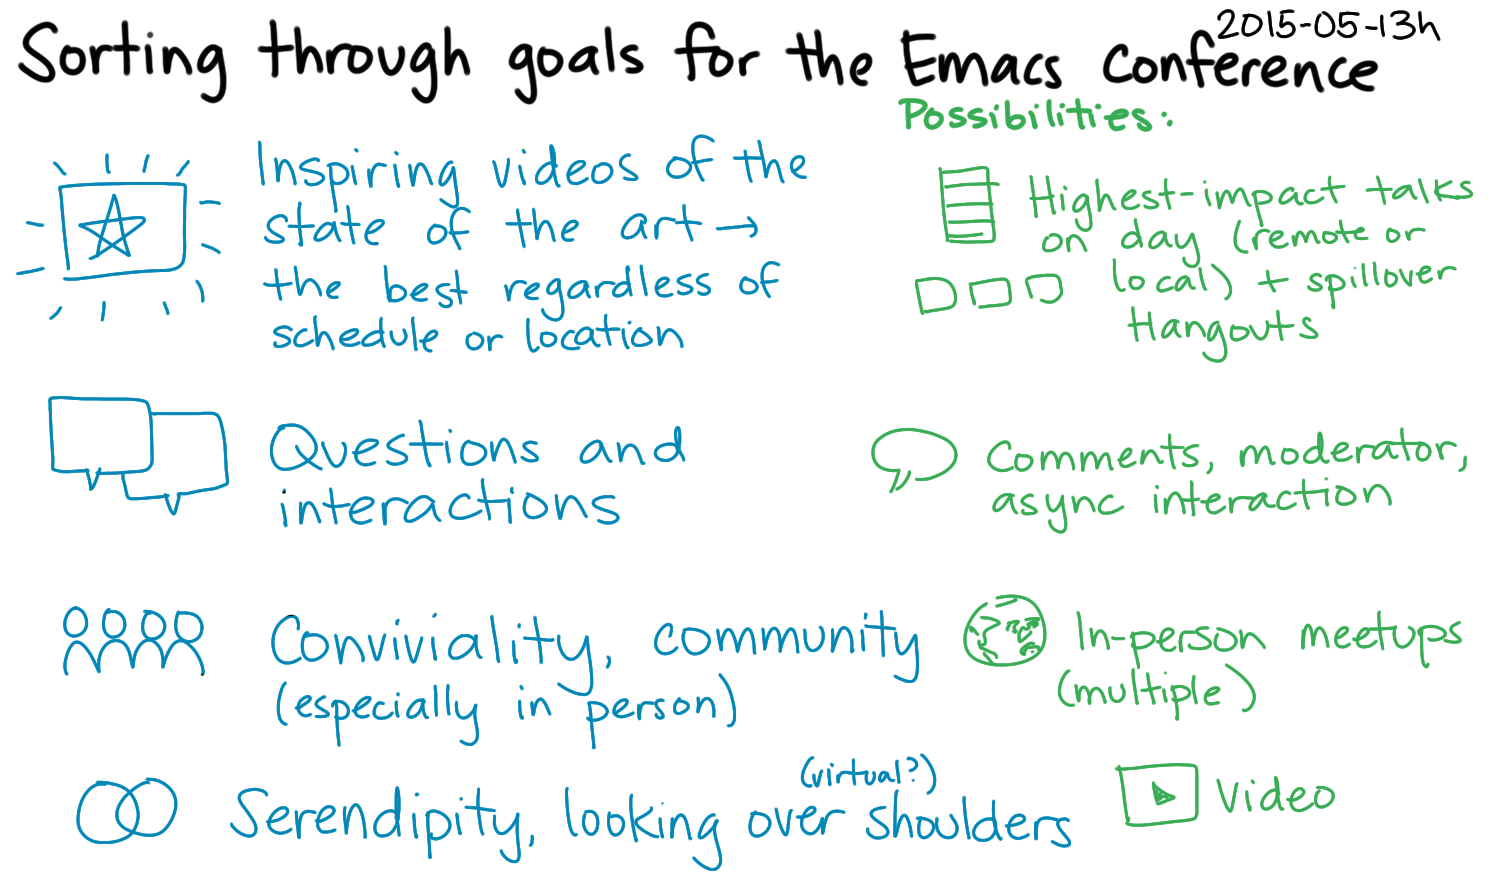 2015-05-13h Sorting through goals for the Emacs conference -- index card #emacs #emacsconf.png